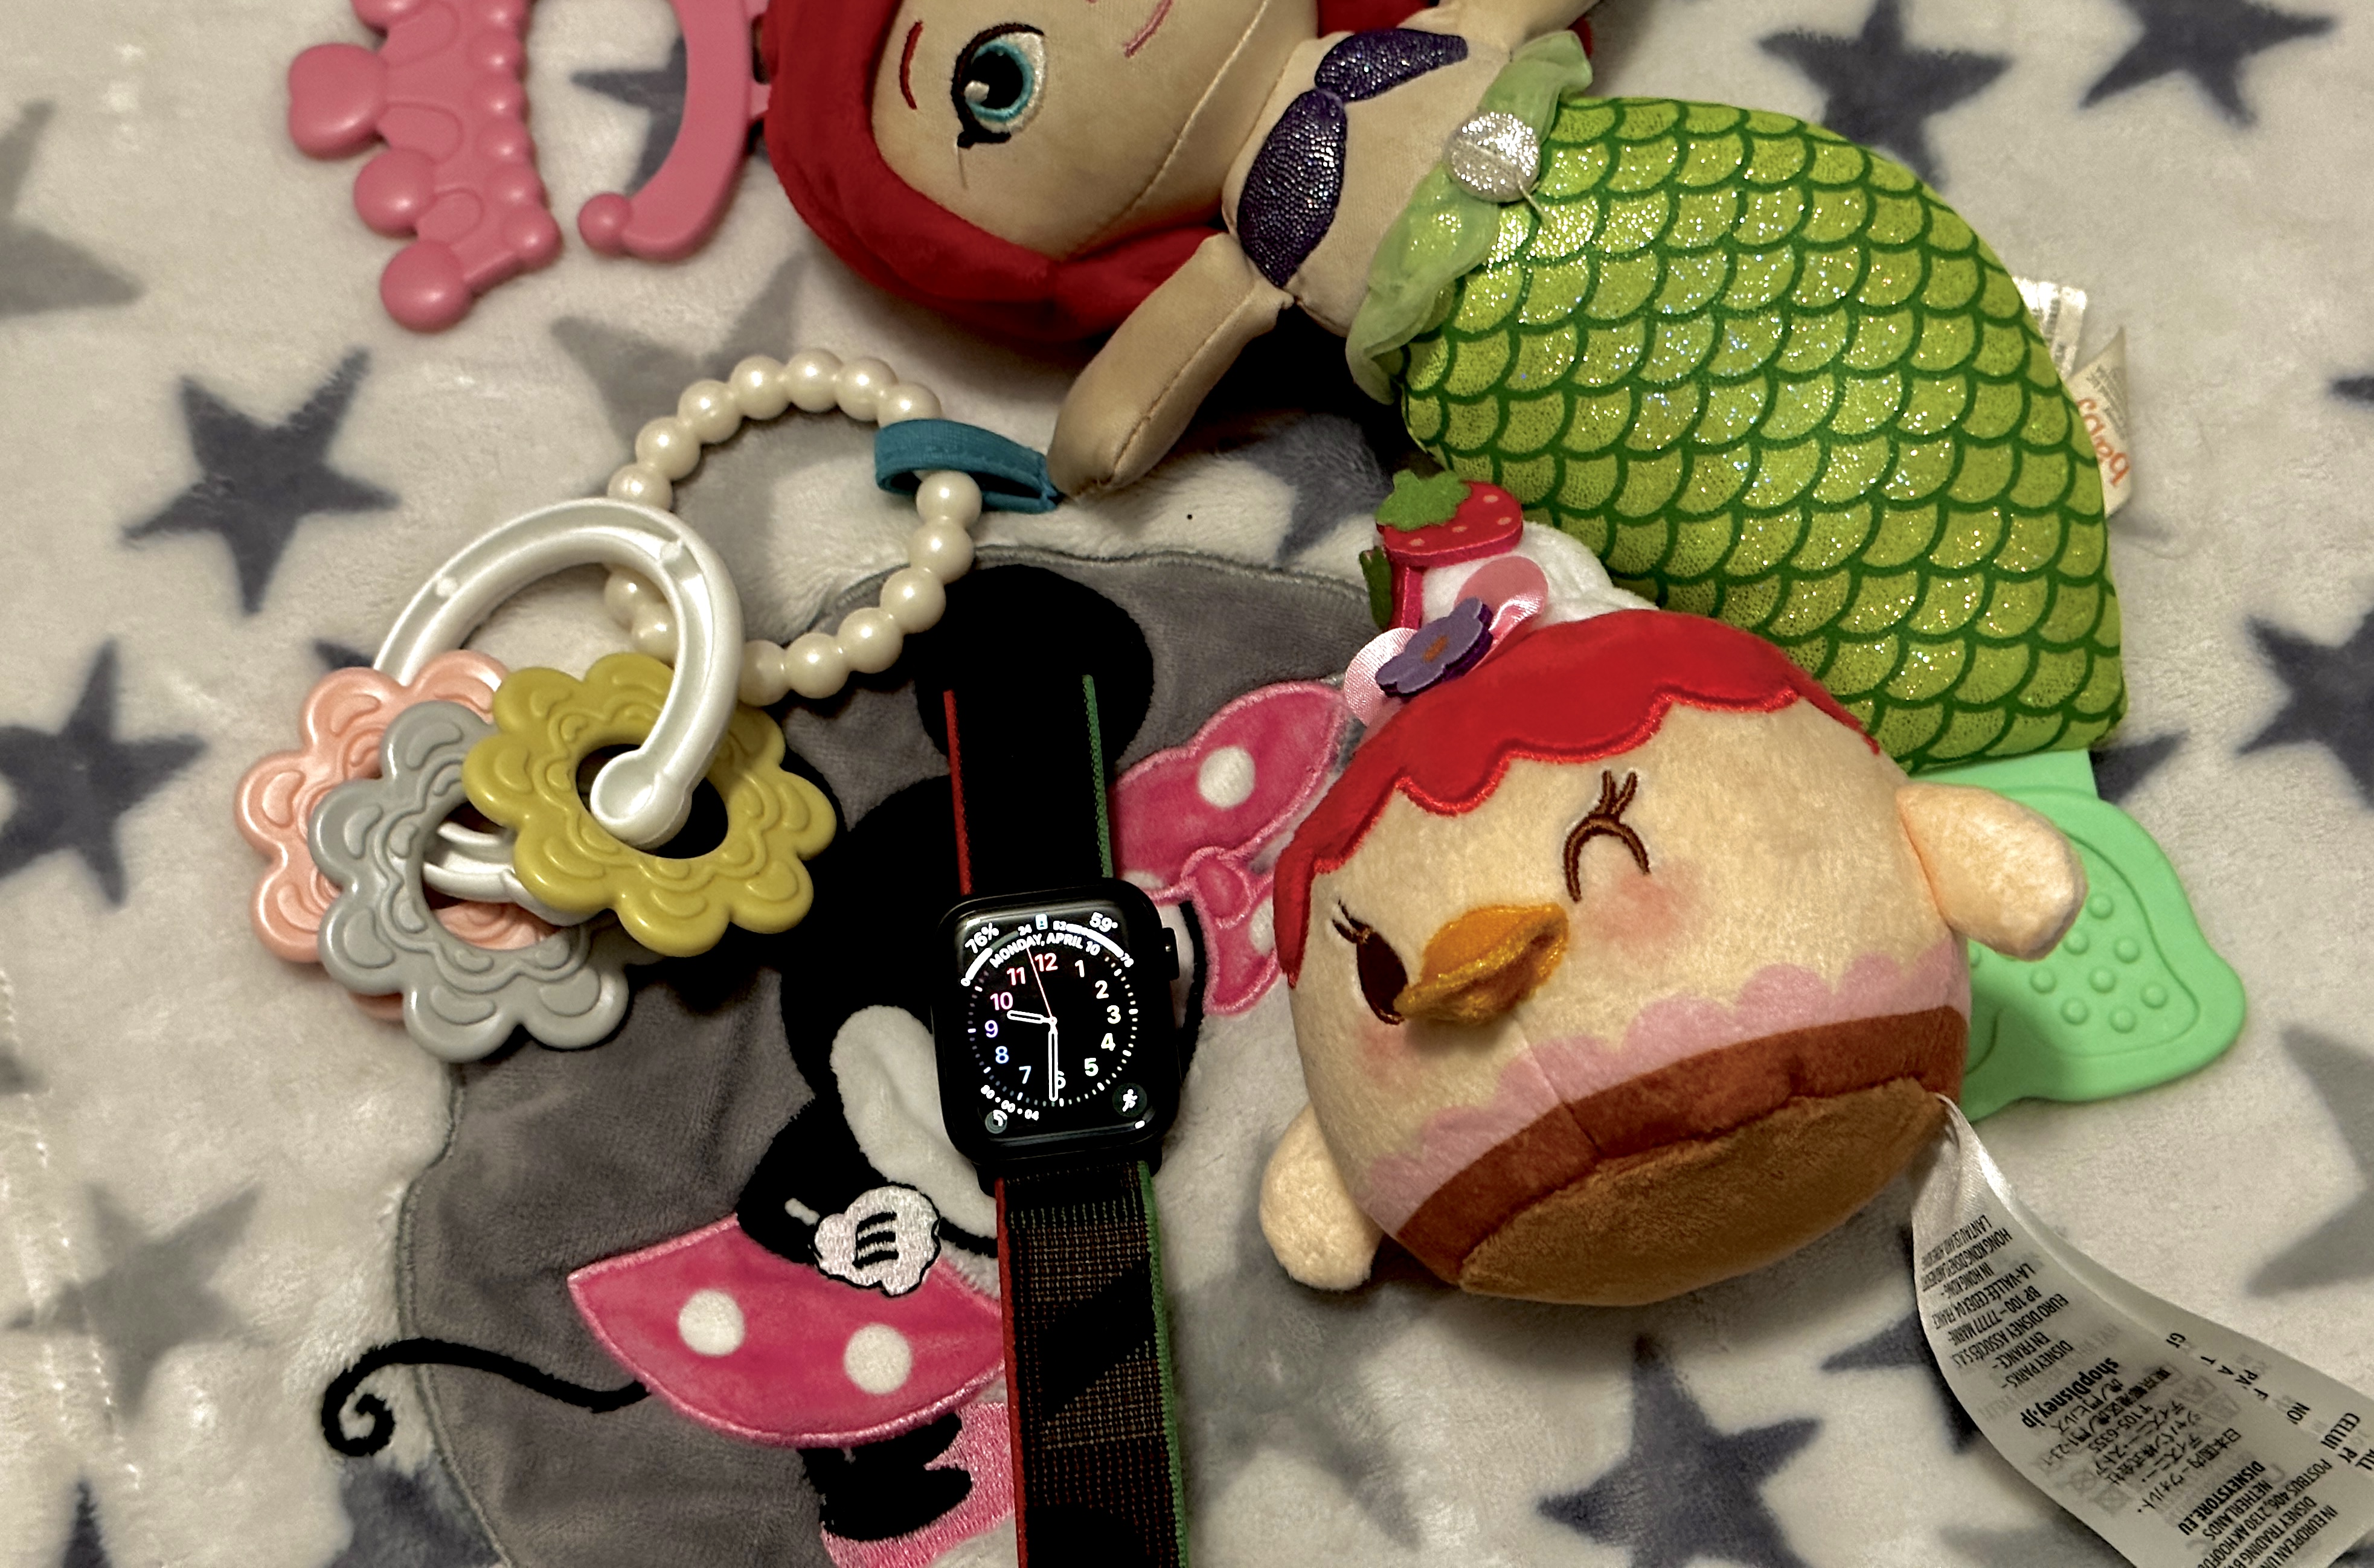 Apple Watch laying among some children's toys on a blanket